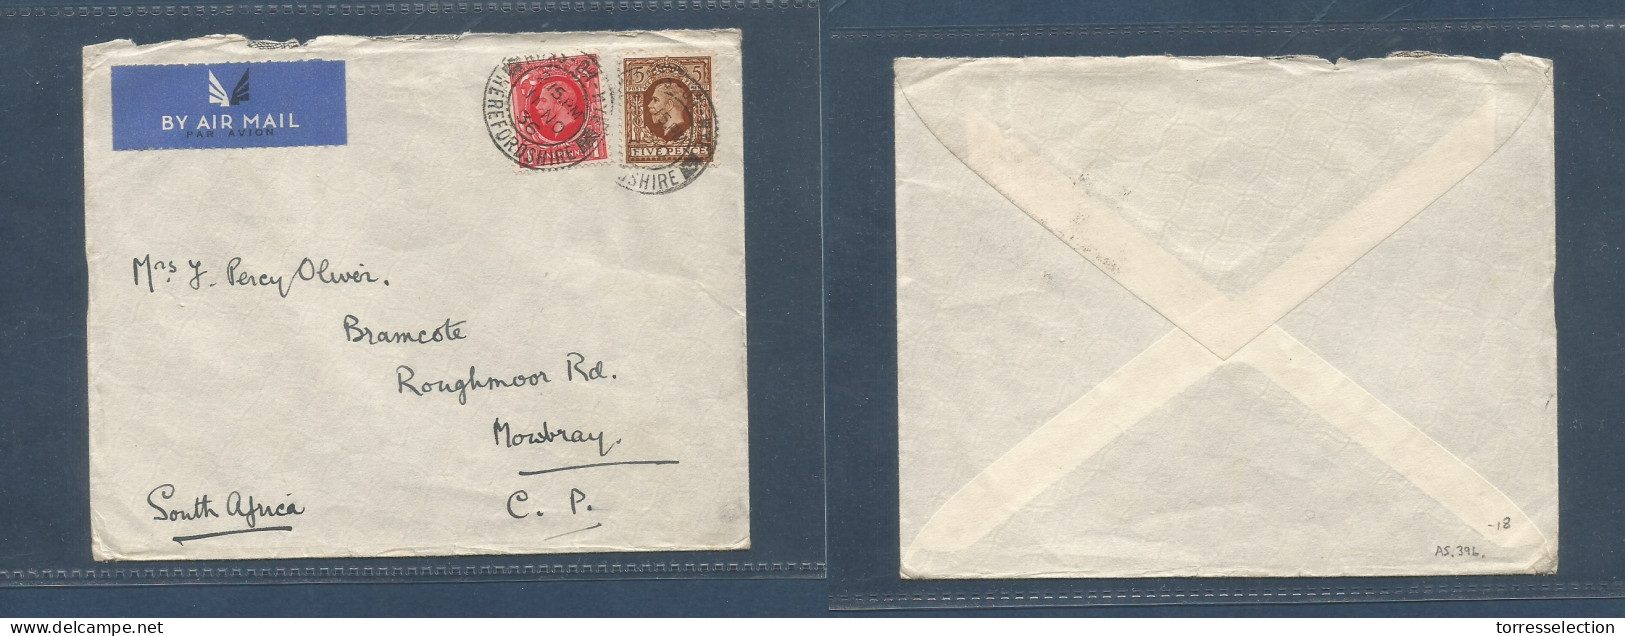 Great Britain - XX. 1936 (11 Nov) Herefordshire - South Africa, Mowbray. 6d Rate Air Imperial Fkd Envelope AS396. XSALE. - ...-1840 Precursores